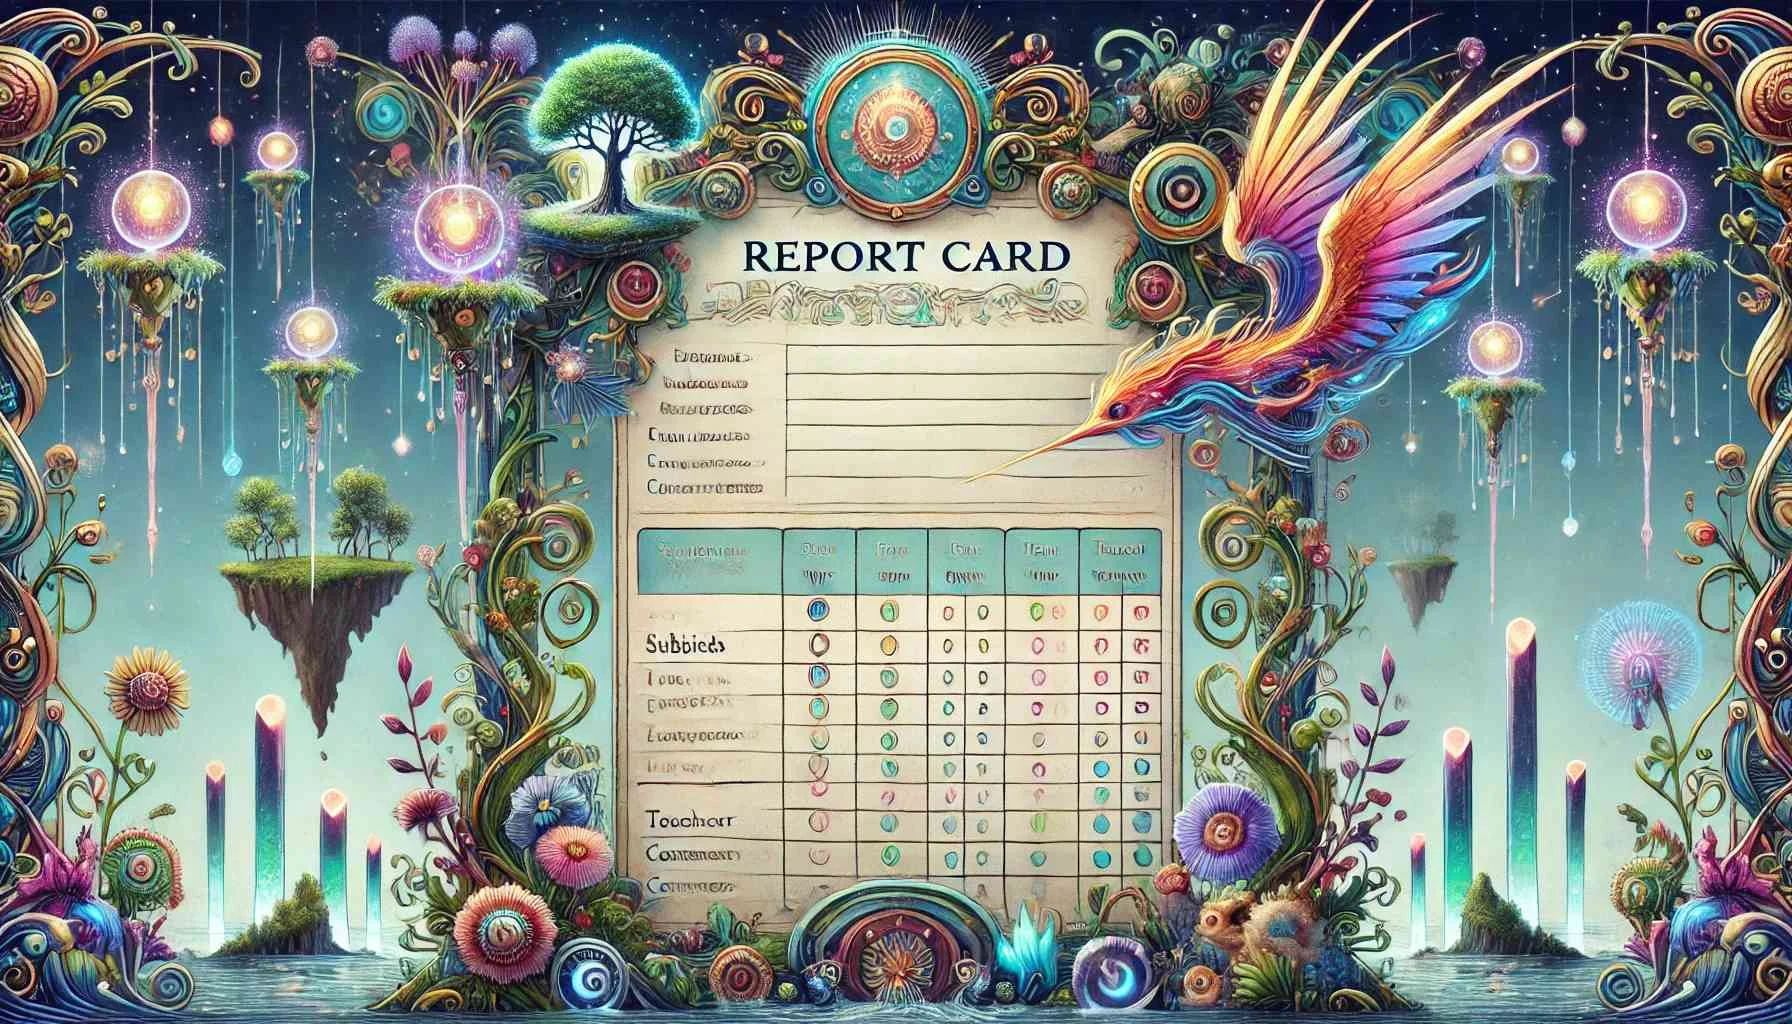 Ion Of A Report Card In The Same Imaginative And Fantasy Style As The Provided Image. The Report Card Should Feature 20240719